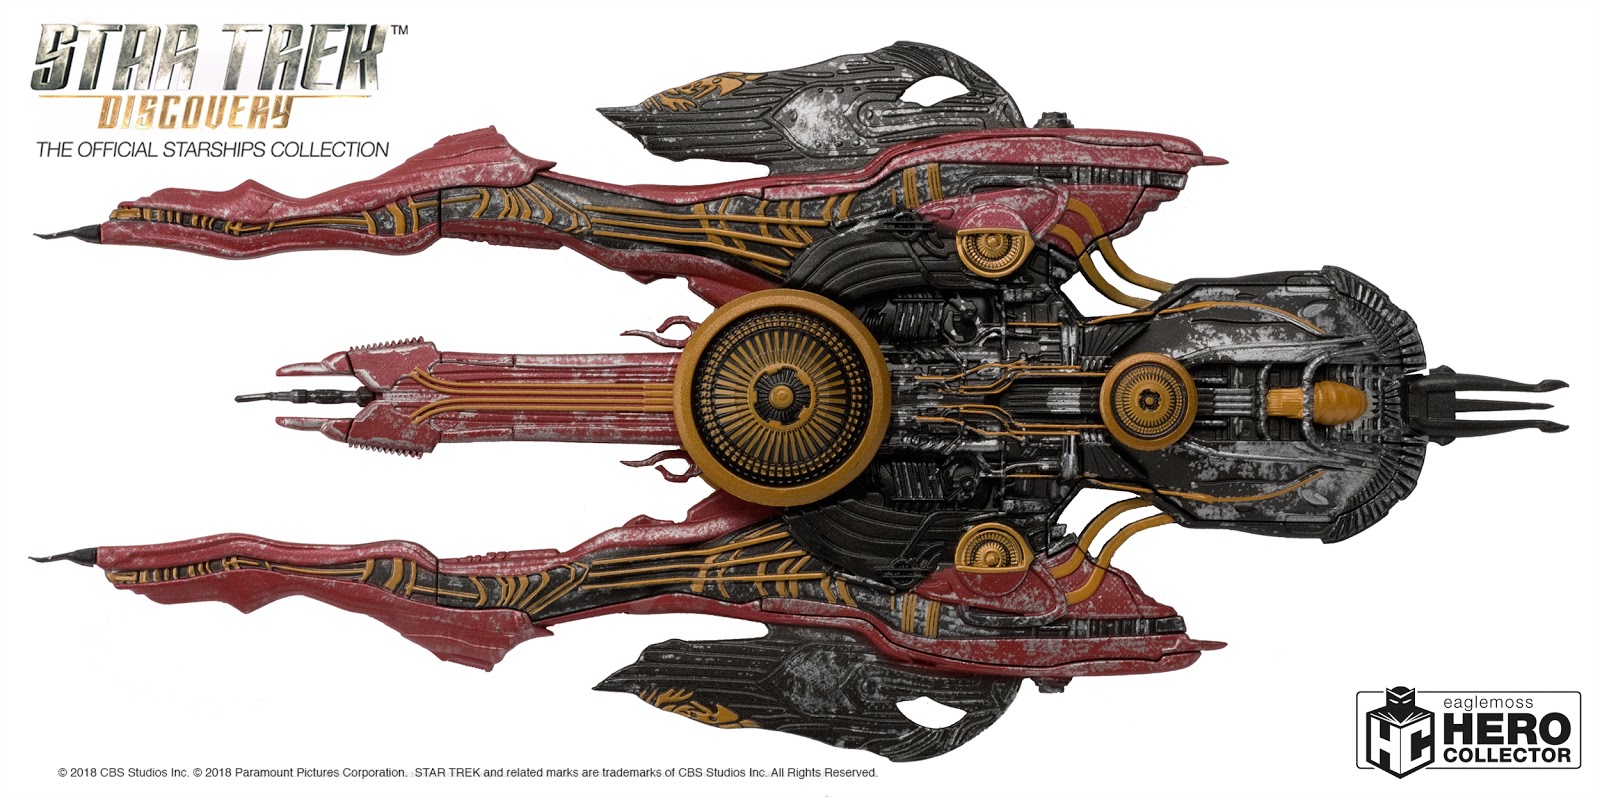 The Trek Collective: Eaglemoss' next Discovery ships, and other